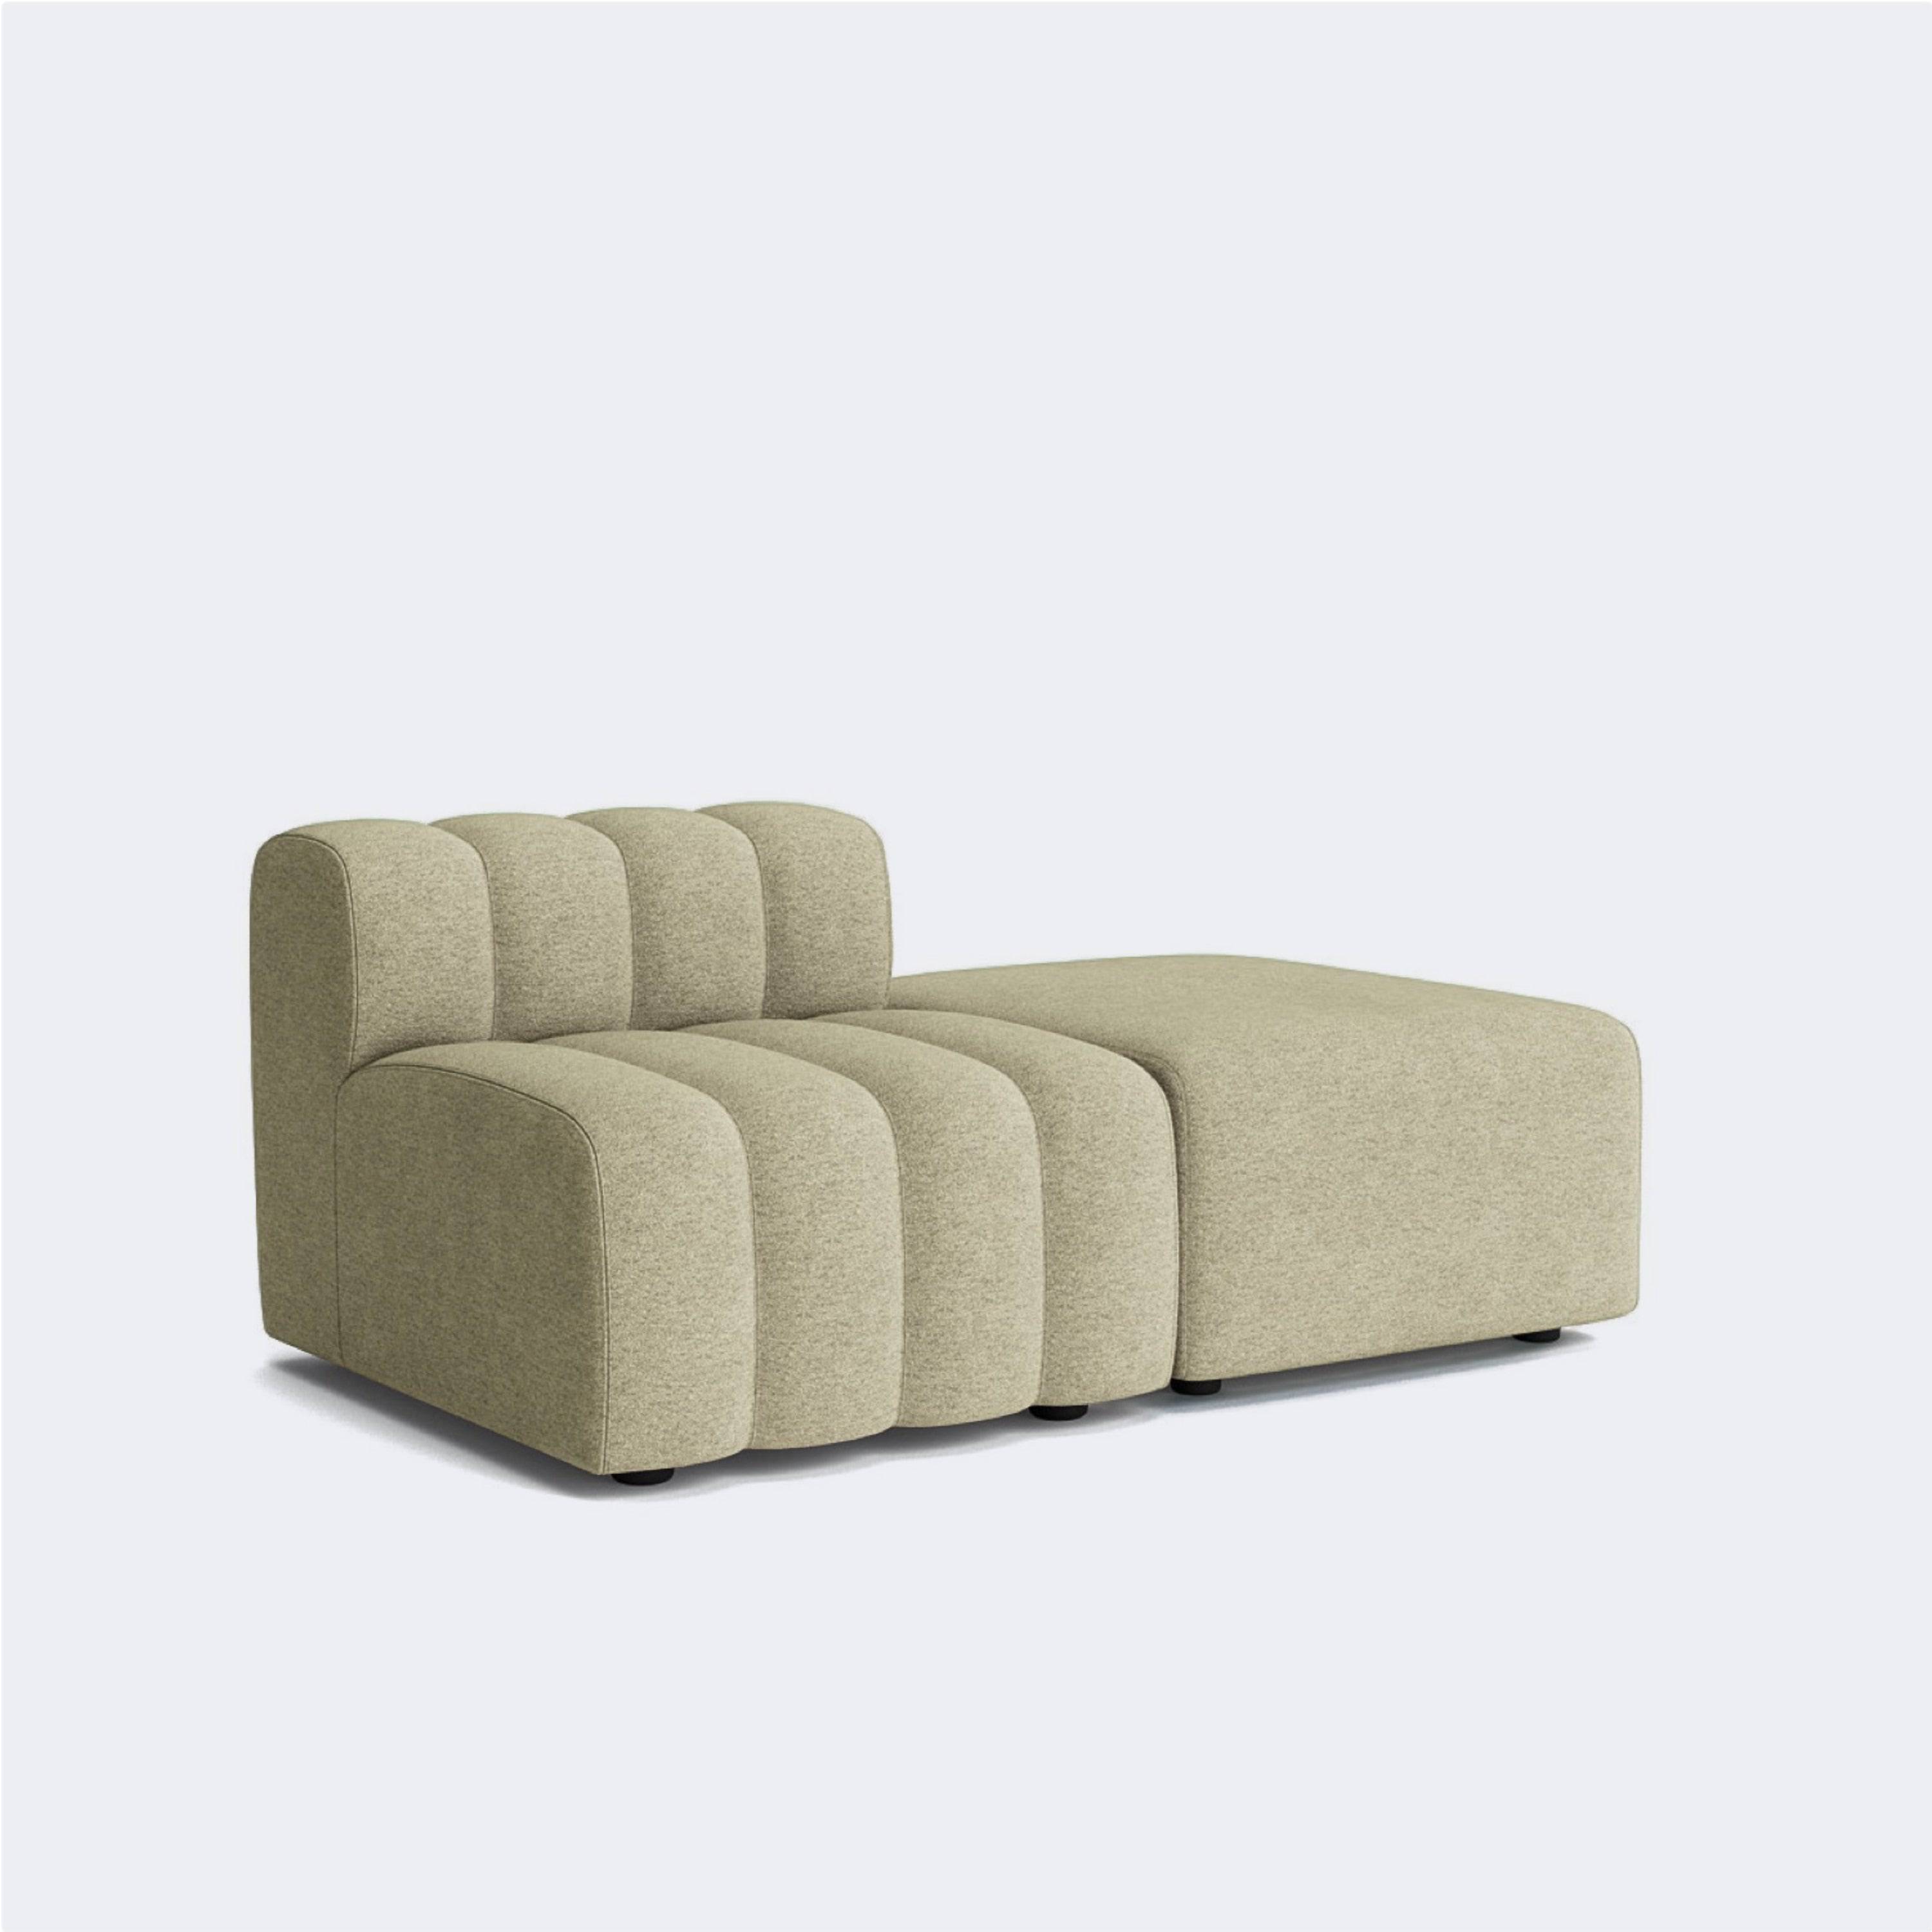 Norr11 Studio 2 Made To Order (8-10 Weeks) Barnum Col 7 - KANSO#Upholstery_Barnum Col 7